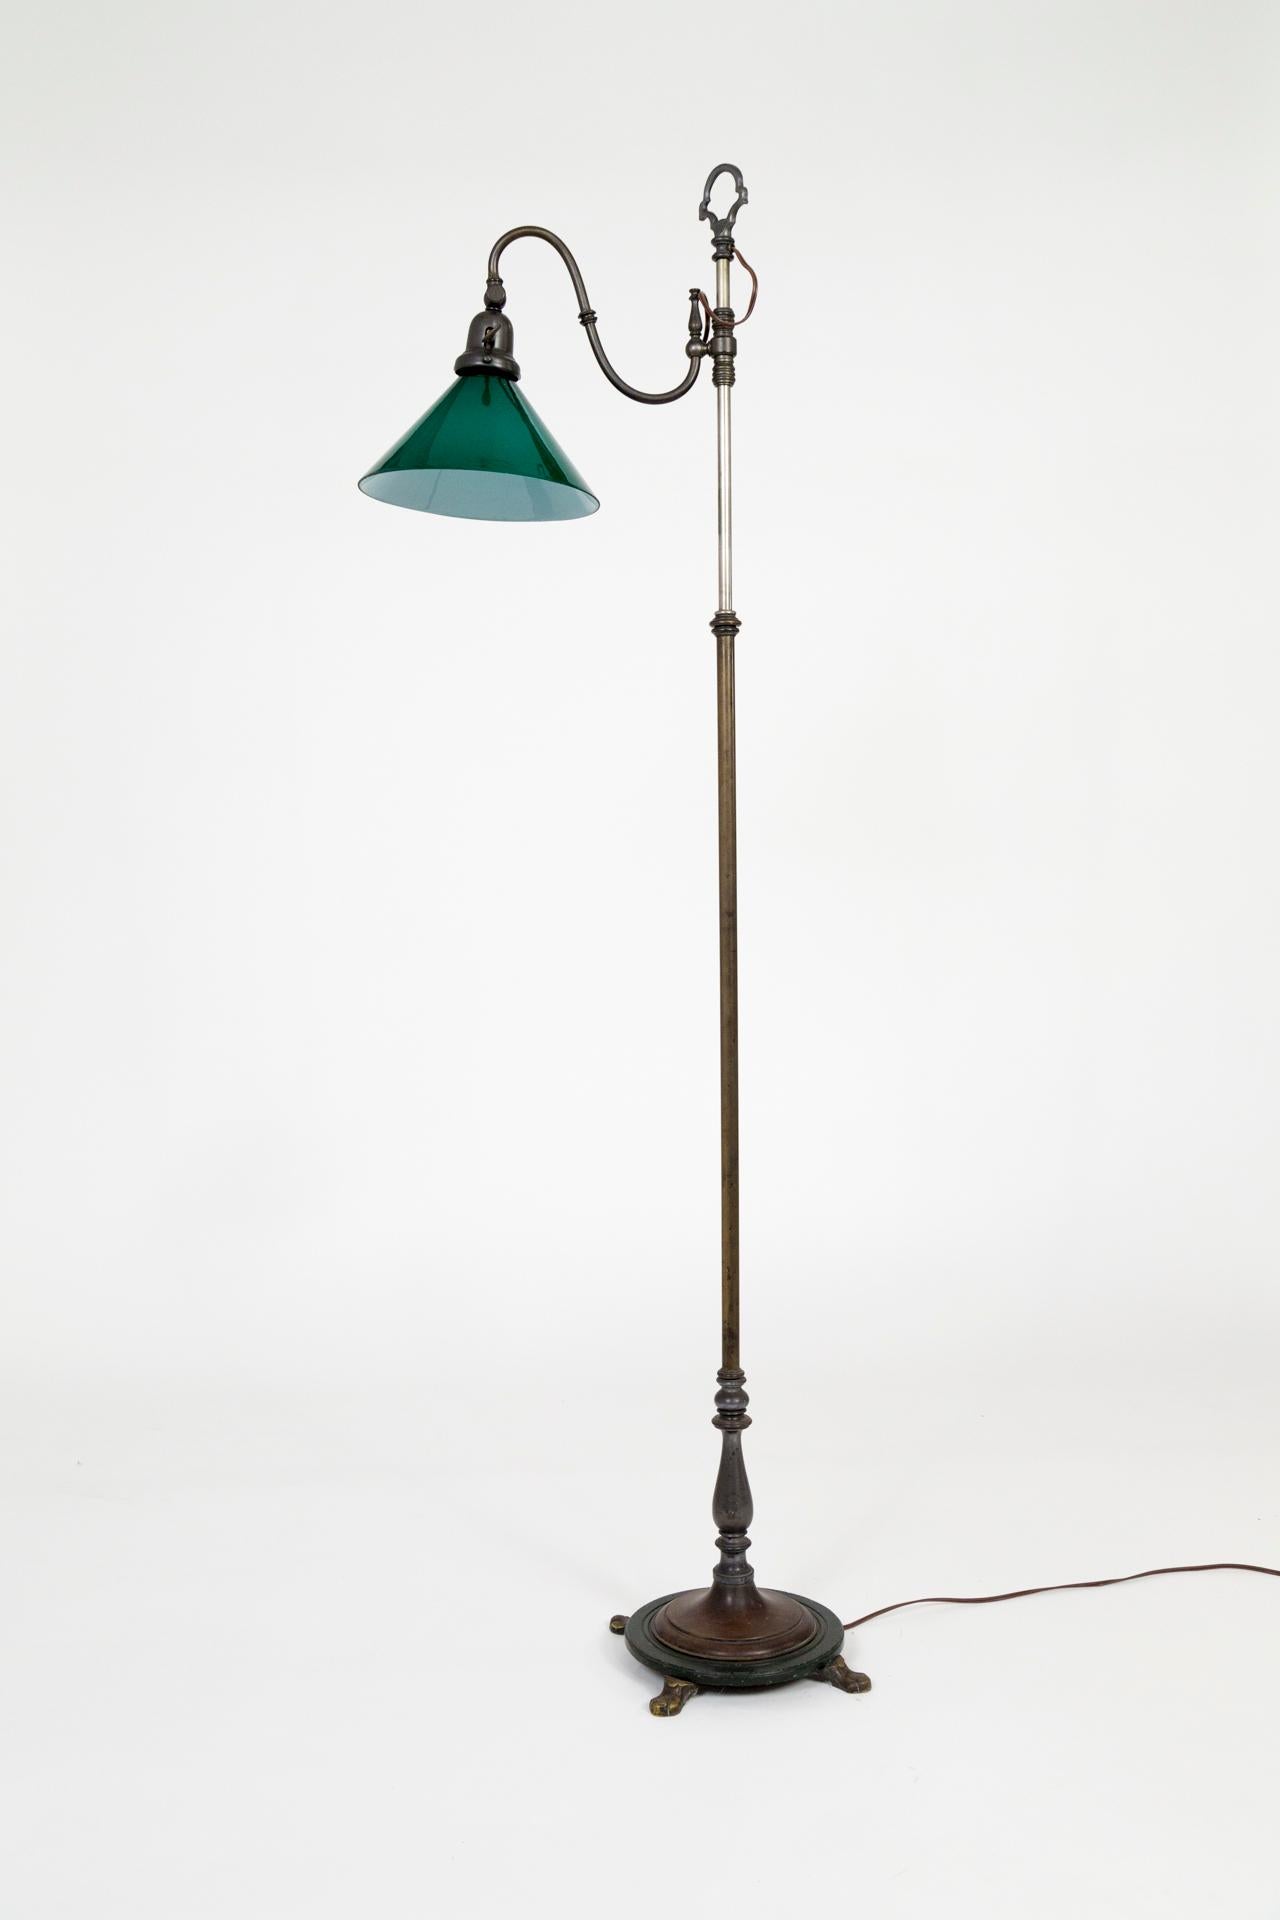 Metal 1930s Adjustable Paw Foot Floor Lamp with Green Accent Base and Shade